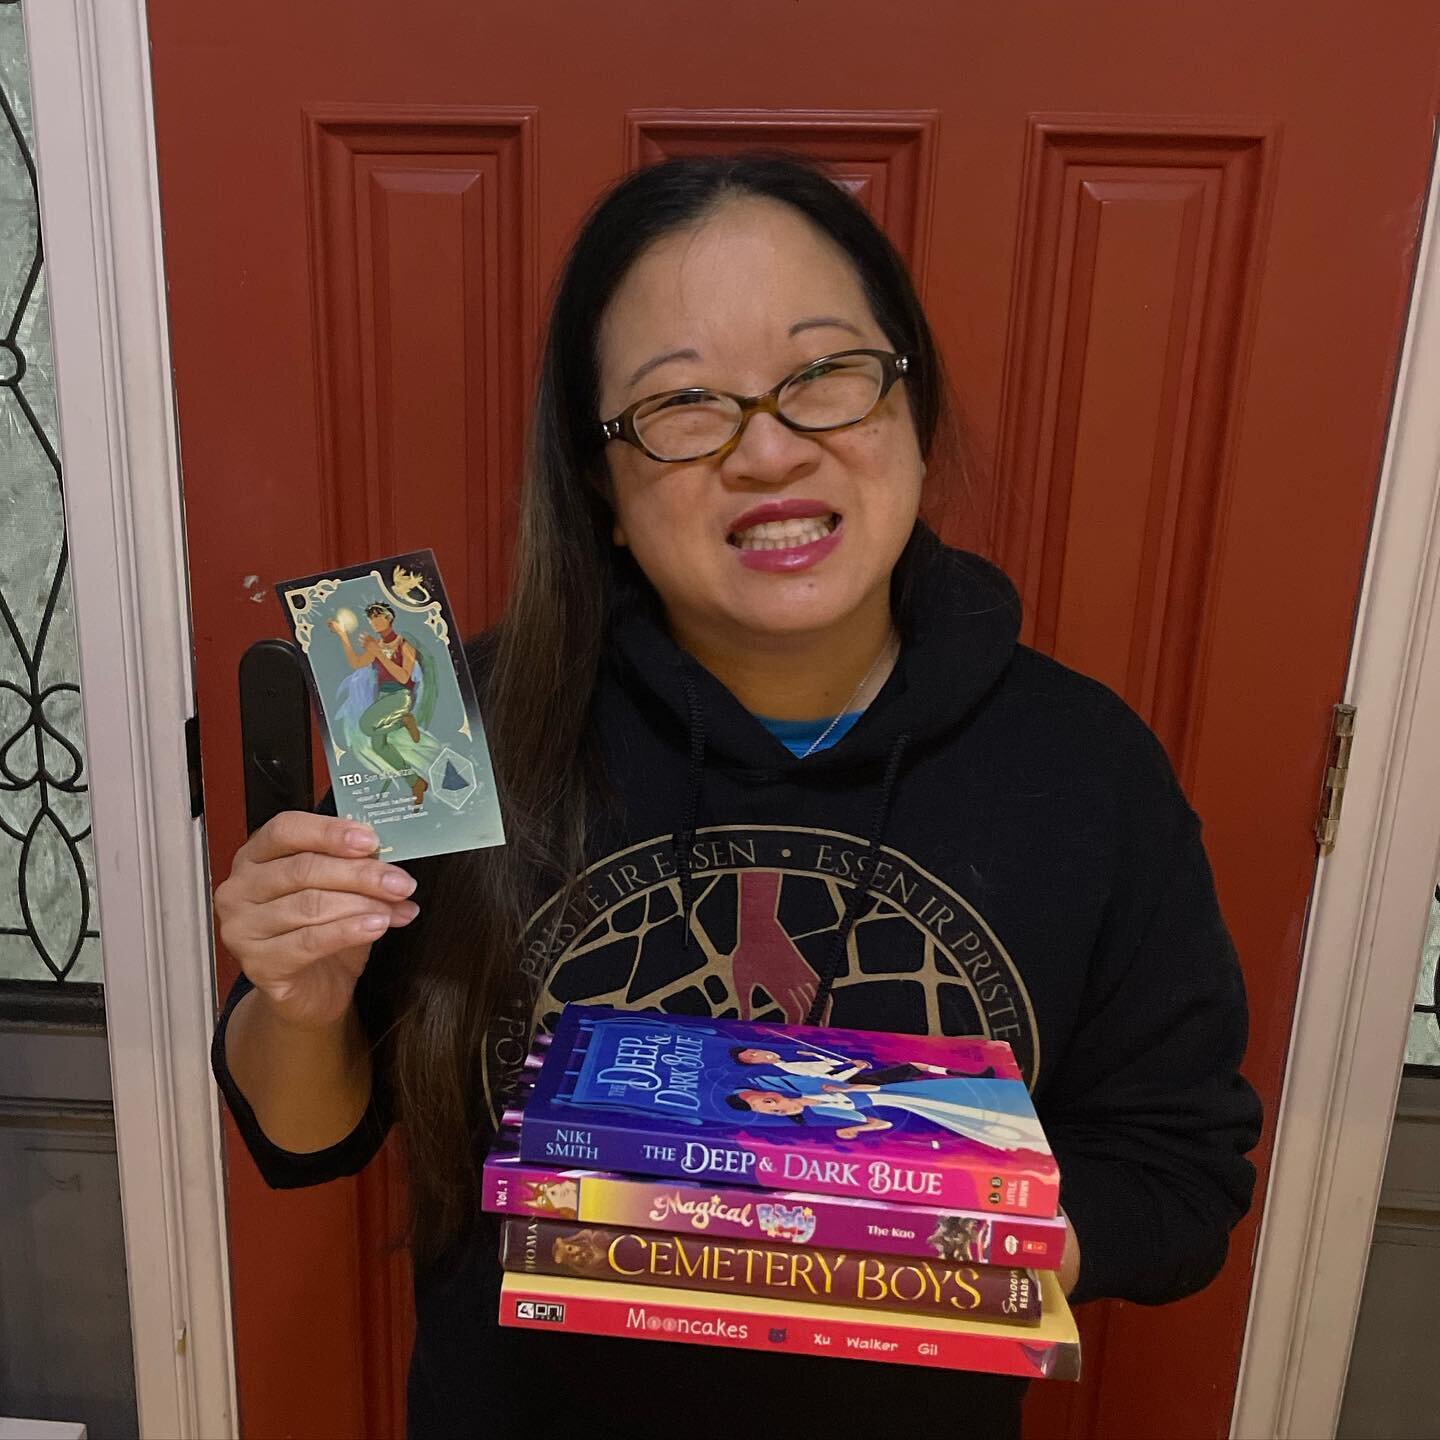 I forgot to post the last of my I-Support-Trans-Rights- Not-Hogwarts-Pride-Days pictures! From a few days ago, here are some books featuring trans or non-binary characters. 

📖 The Deep and Dark Blue by Niki Smith
📖 Magical Boy by The Kao
📖 Cemete